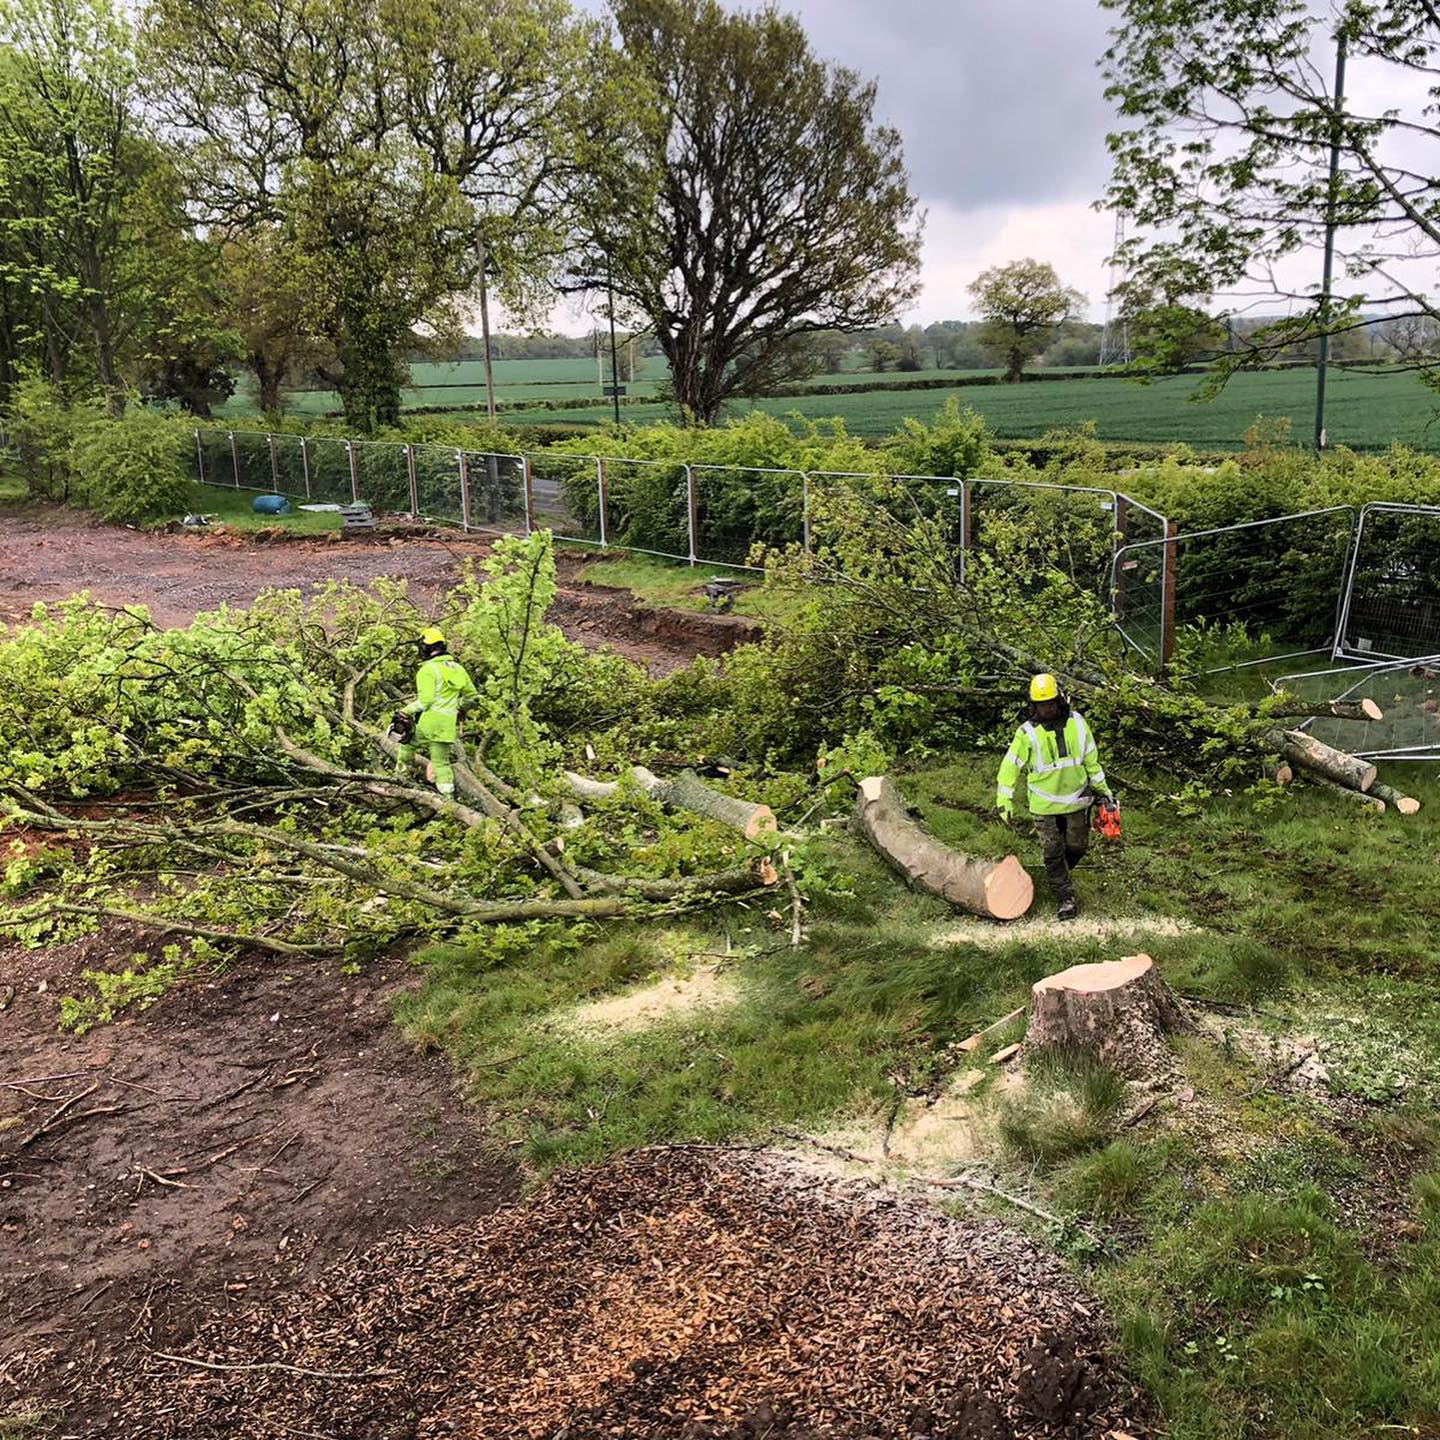 Clearing site of trees and hedges